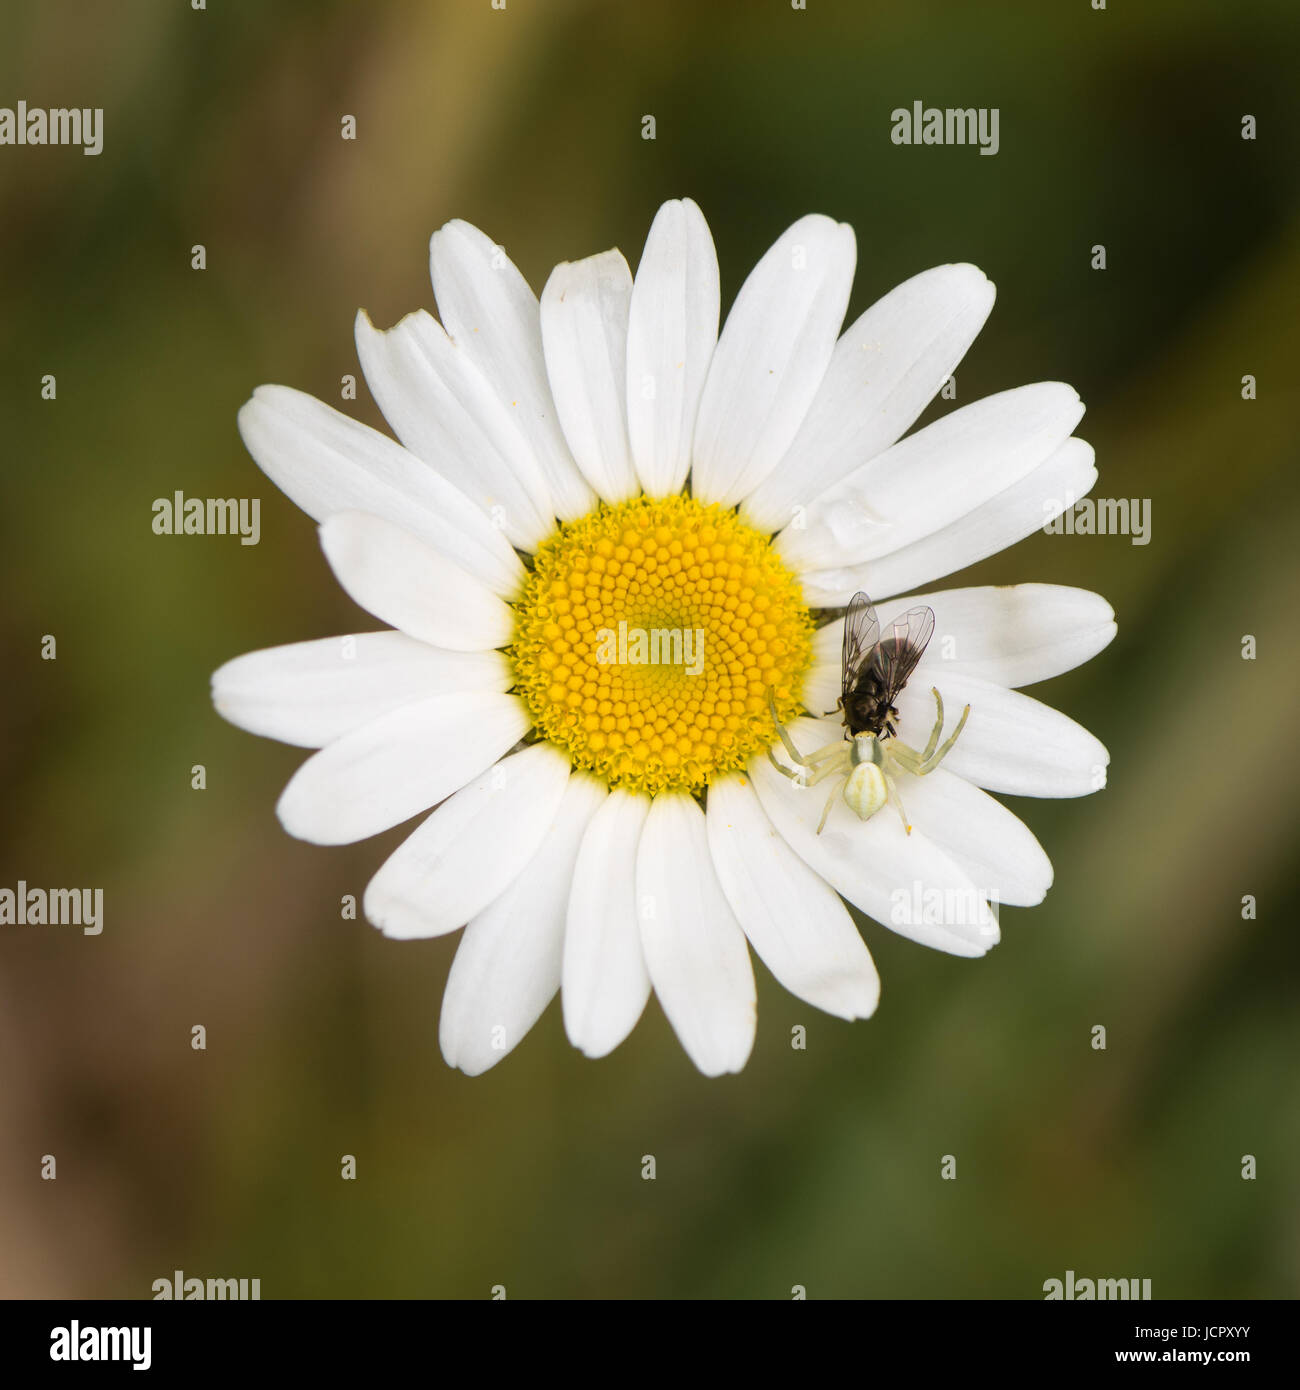 Misumena vatia crab spider with fly on daisy. Camouflaged arachnid holding prey on ox-eye daisy (Leucanthemum vulgare), in the family Asteraceae Stock Photo